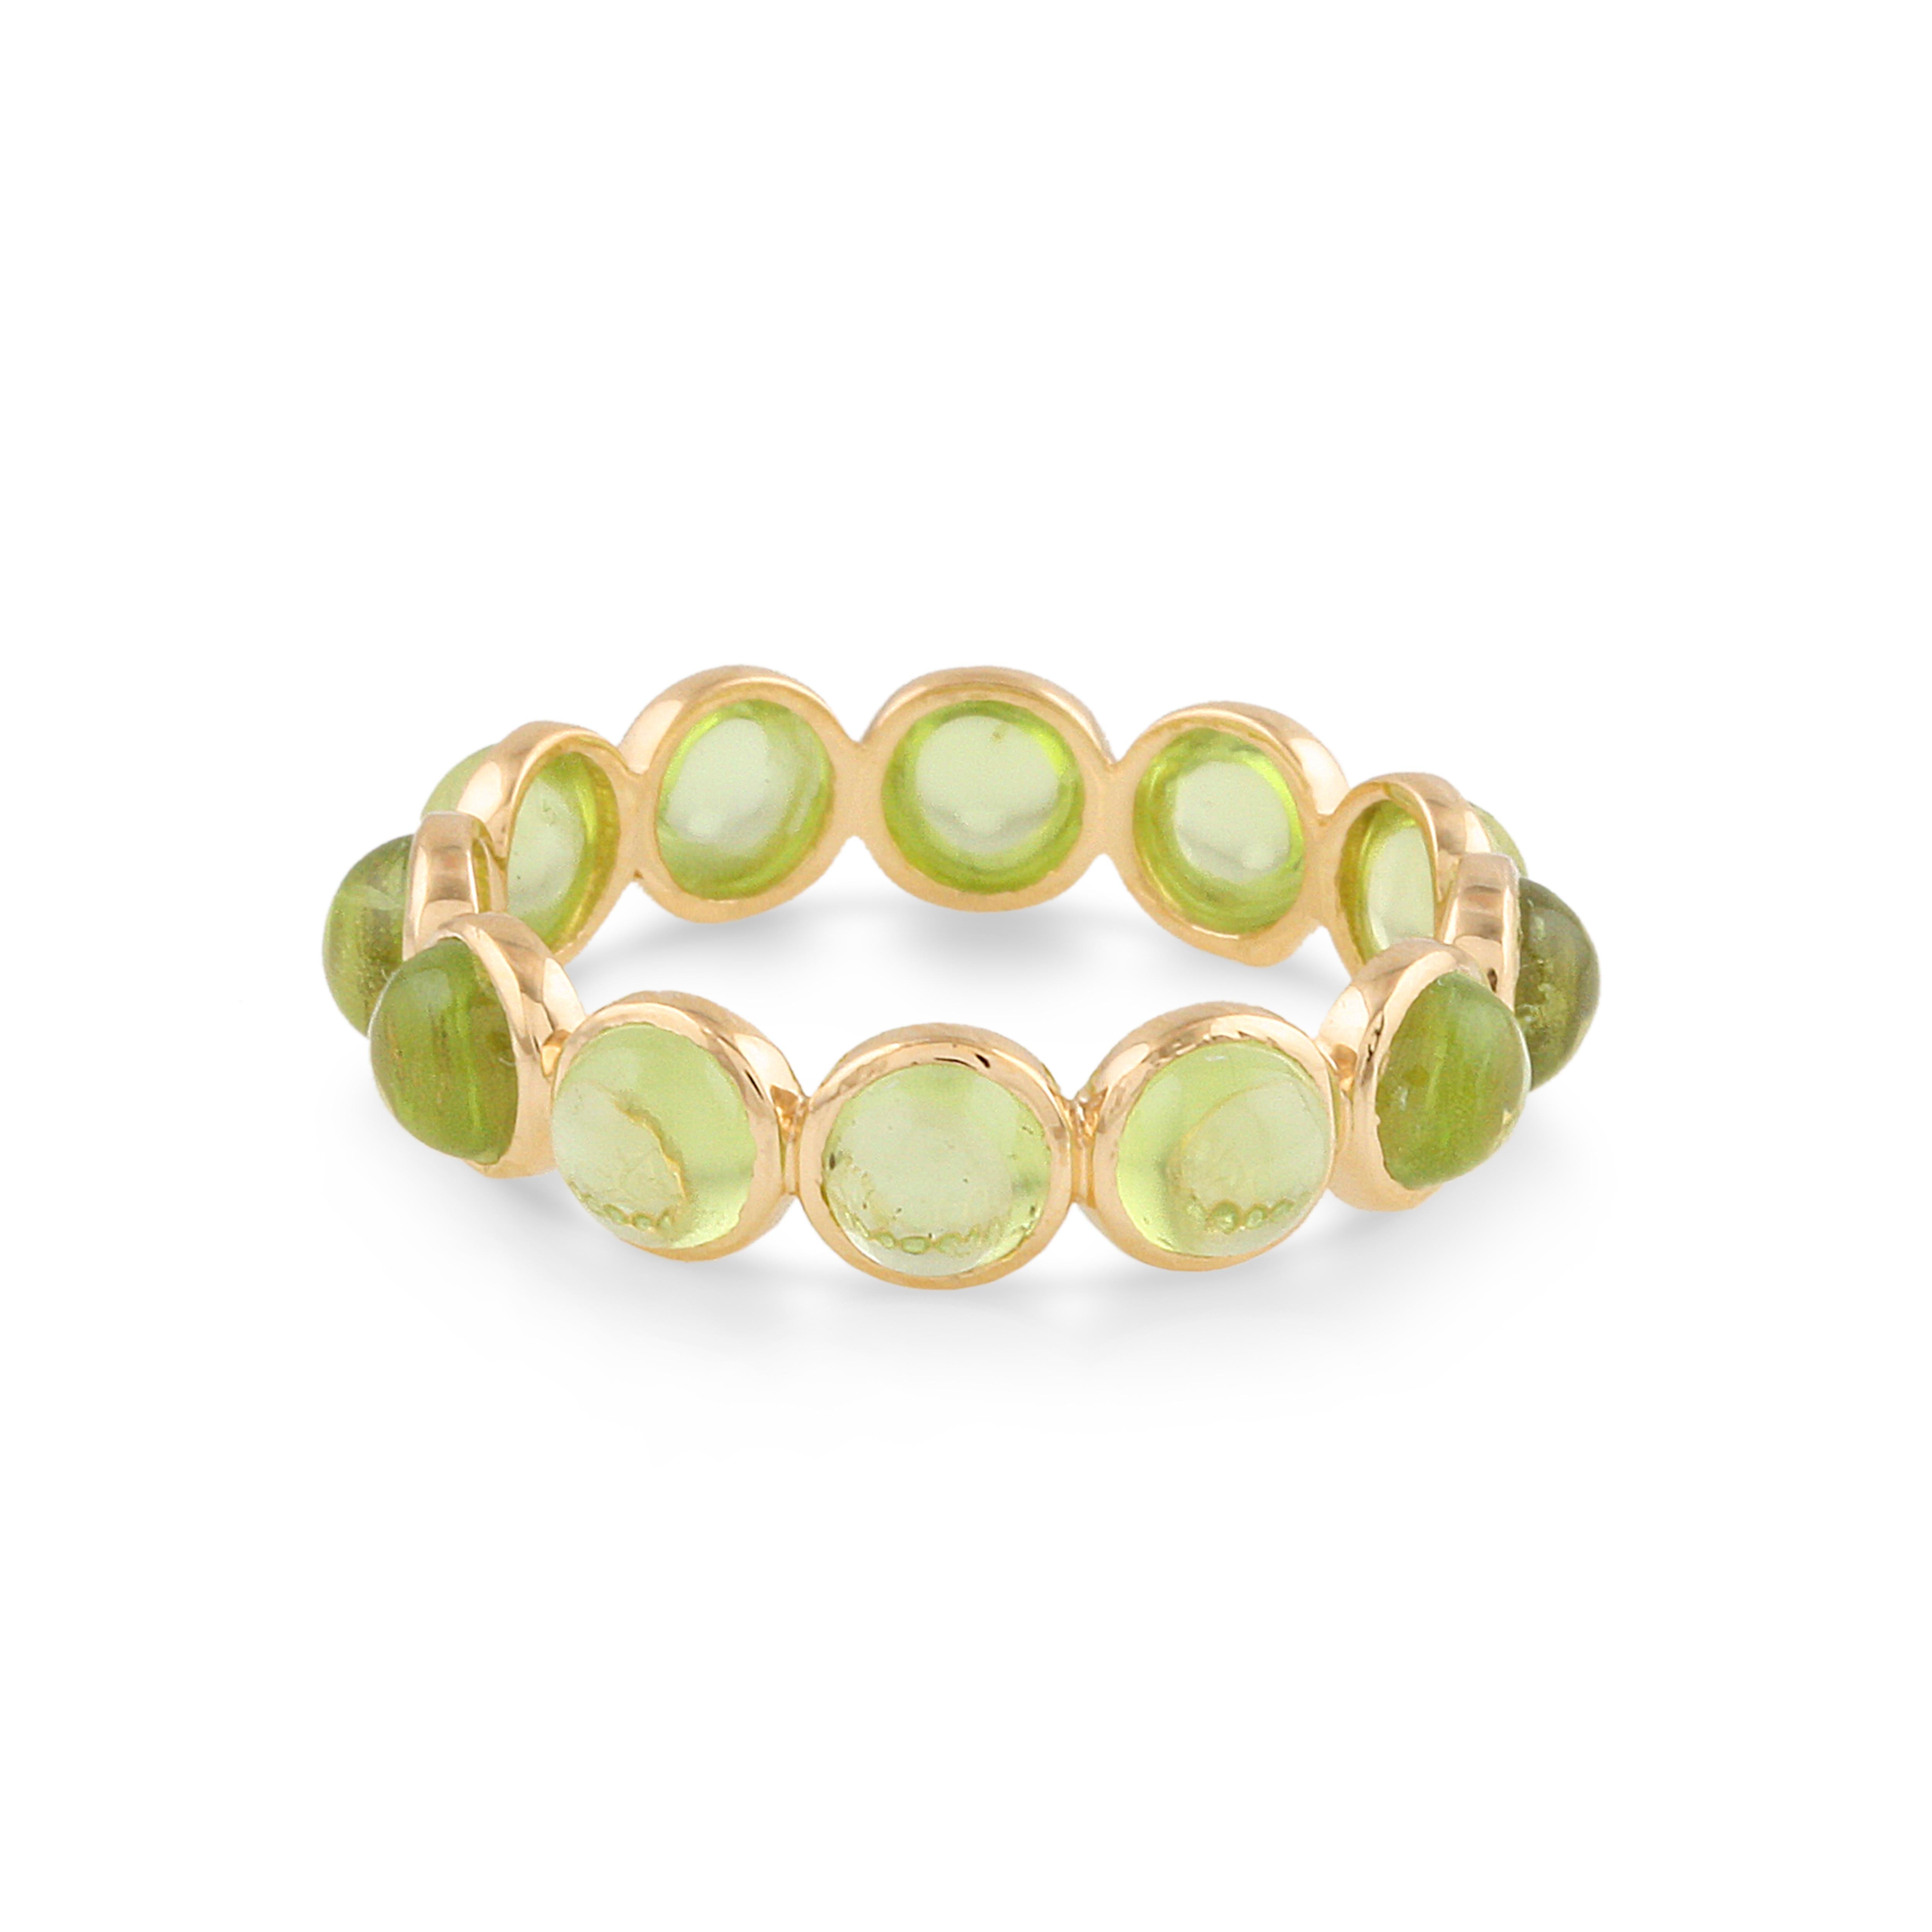 Tresor Beautiful Ring feature 1.50 carats of Peridot. The Ring are an ode to the luxurious yet classic beauty with sparkly gemstones and feminine hues. Their contemporary and modern design make them perfect and versatile to be worn at any occasion. 